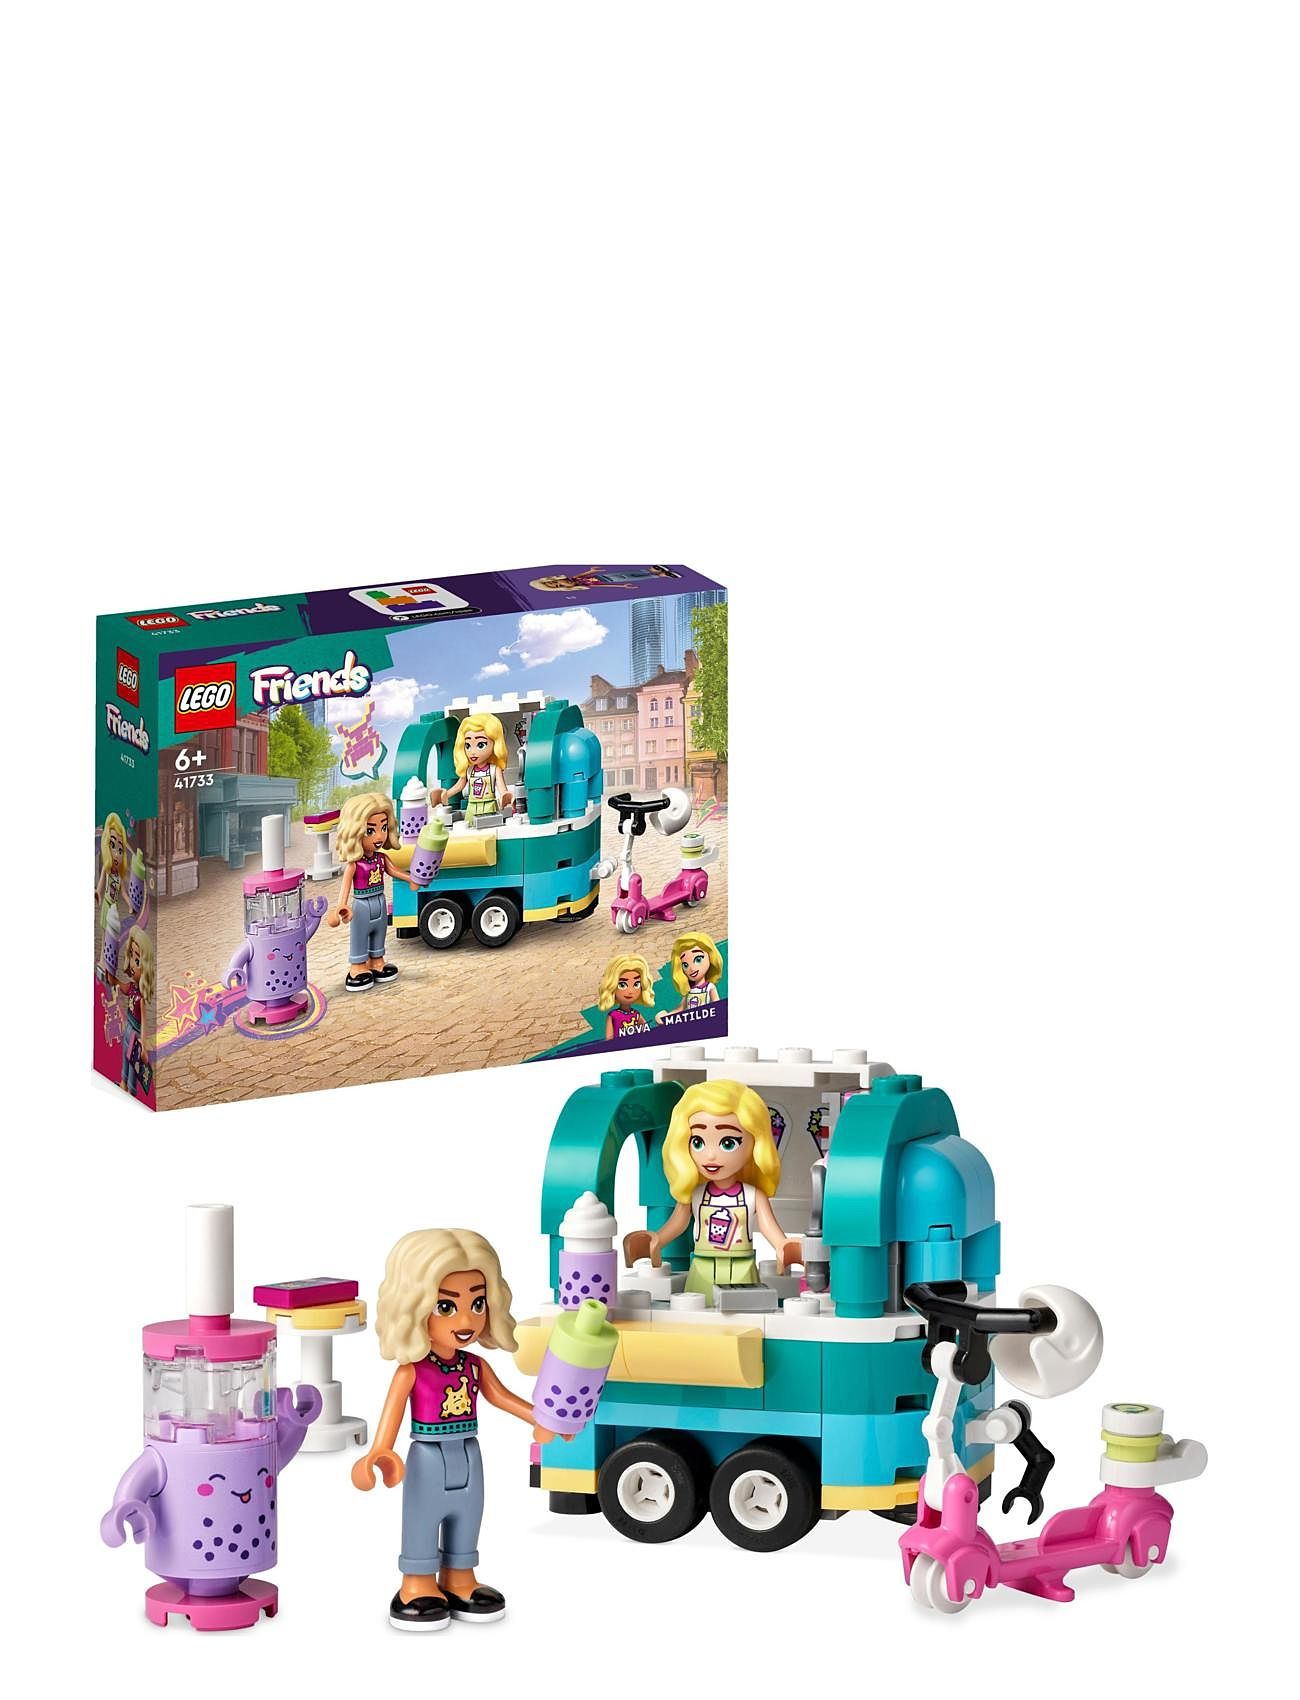 Mobile Bubble Tea Shop With Toy Scooter Toys Lego Toys Lego friends Multi/patterned LEGO